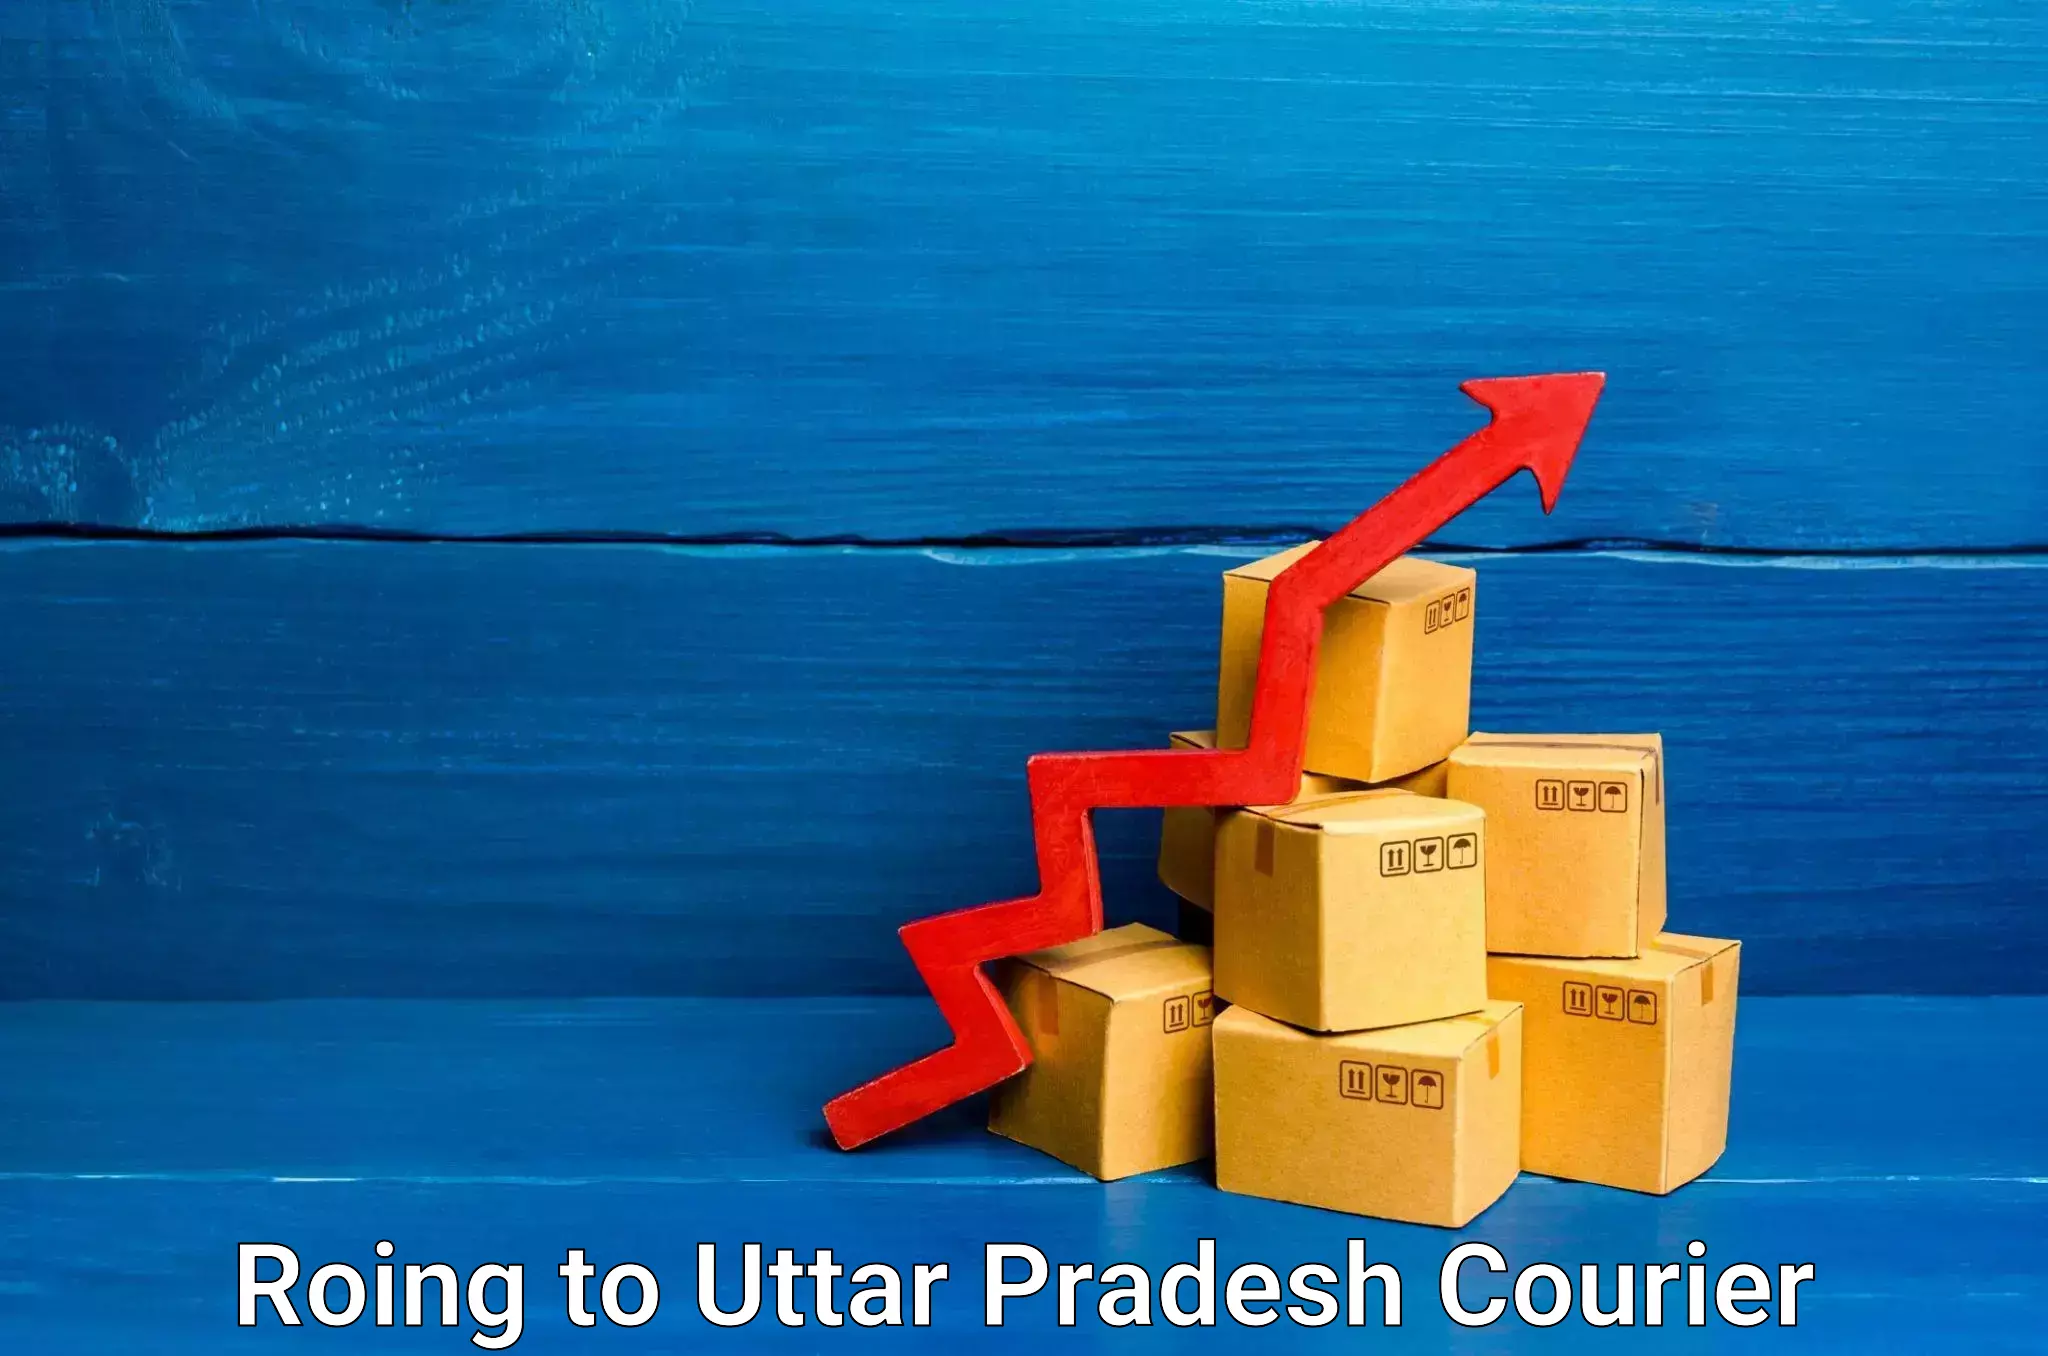 Urban courier service Roing to Allahabad